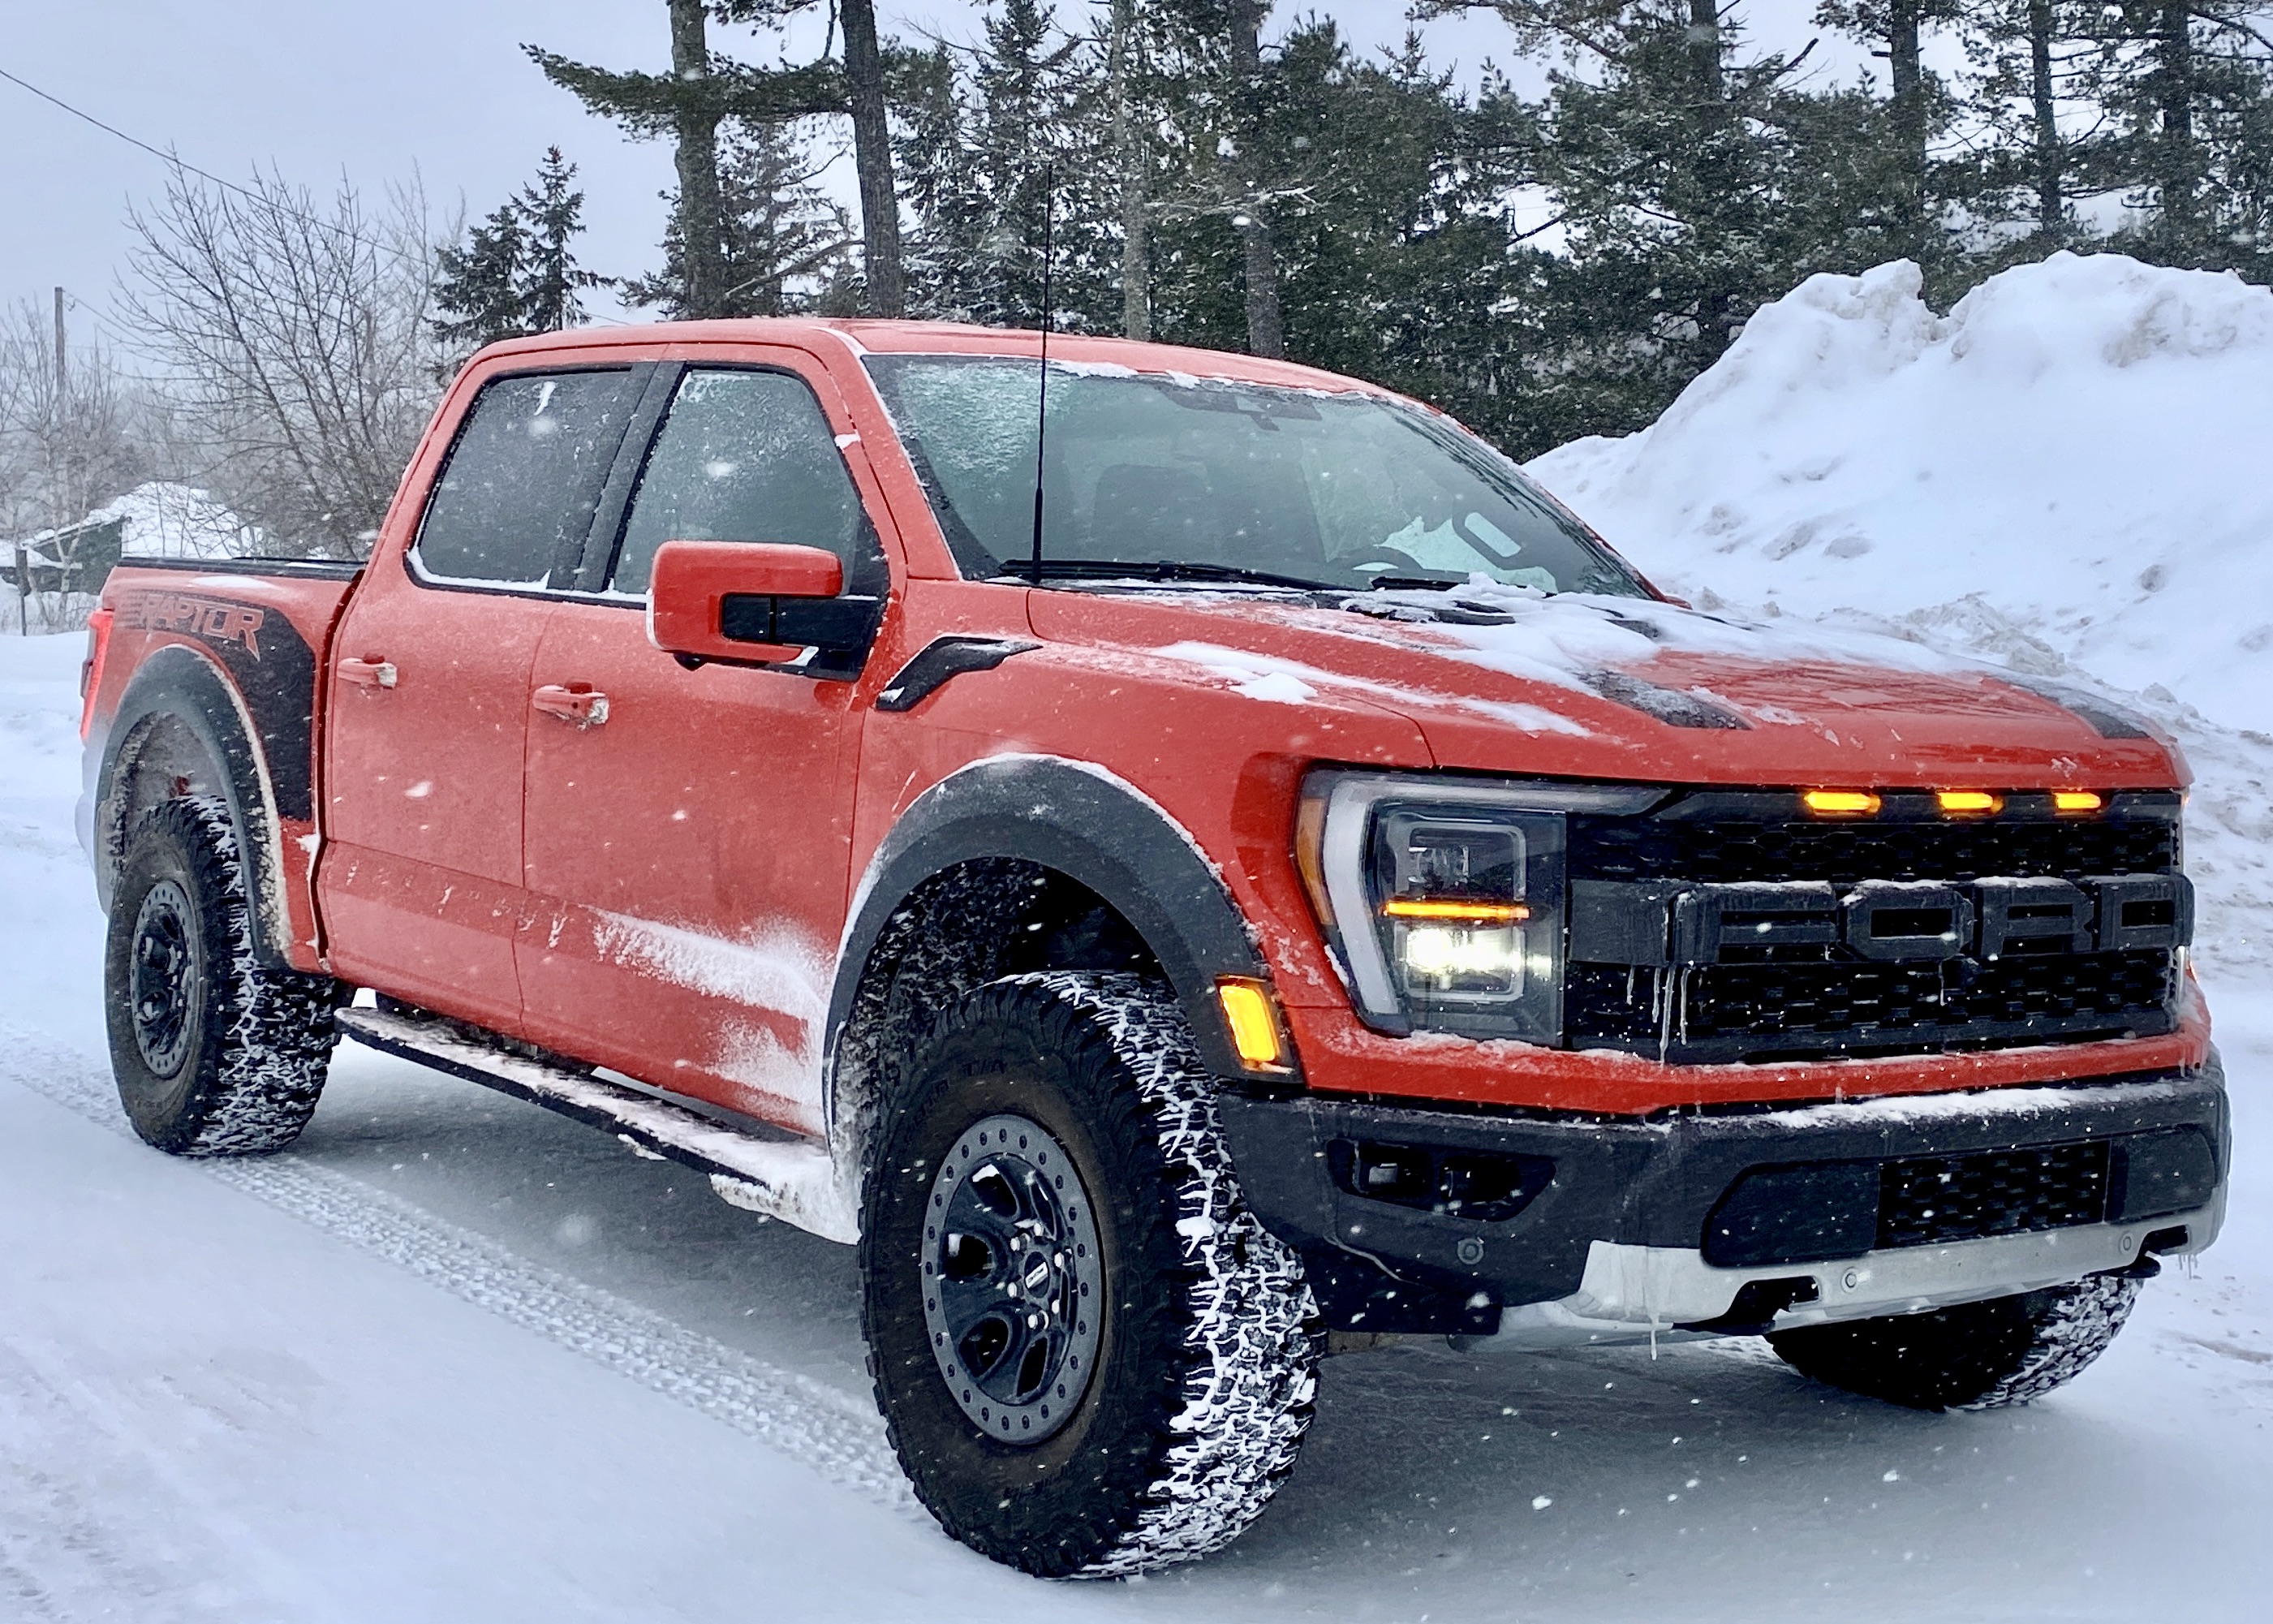 Ford Raptor gains capability every generation, conquers blizzards with ease.